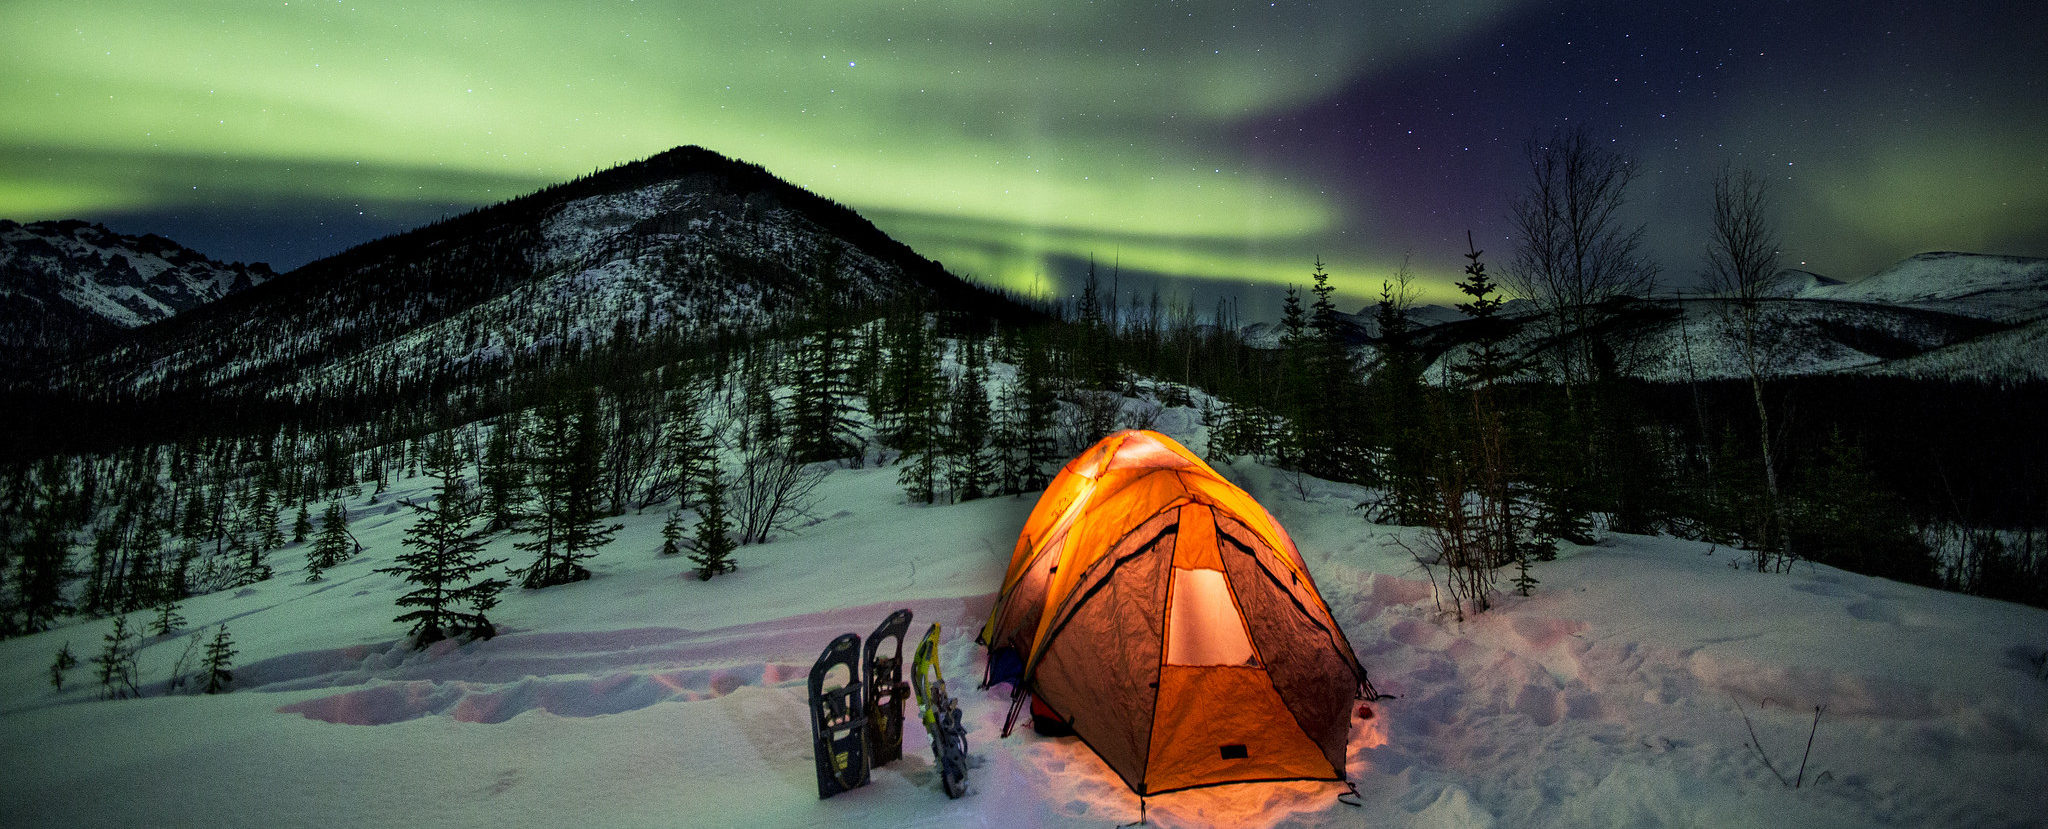 Tent in the snow under the northern lights